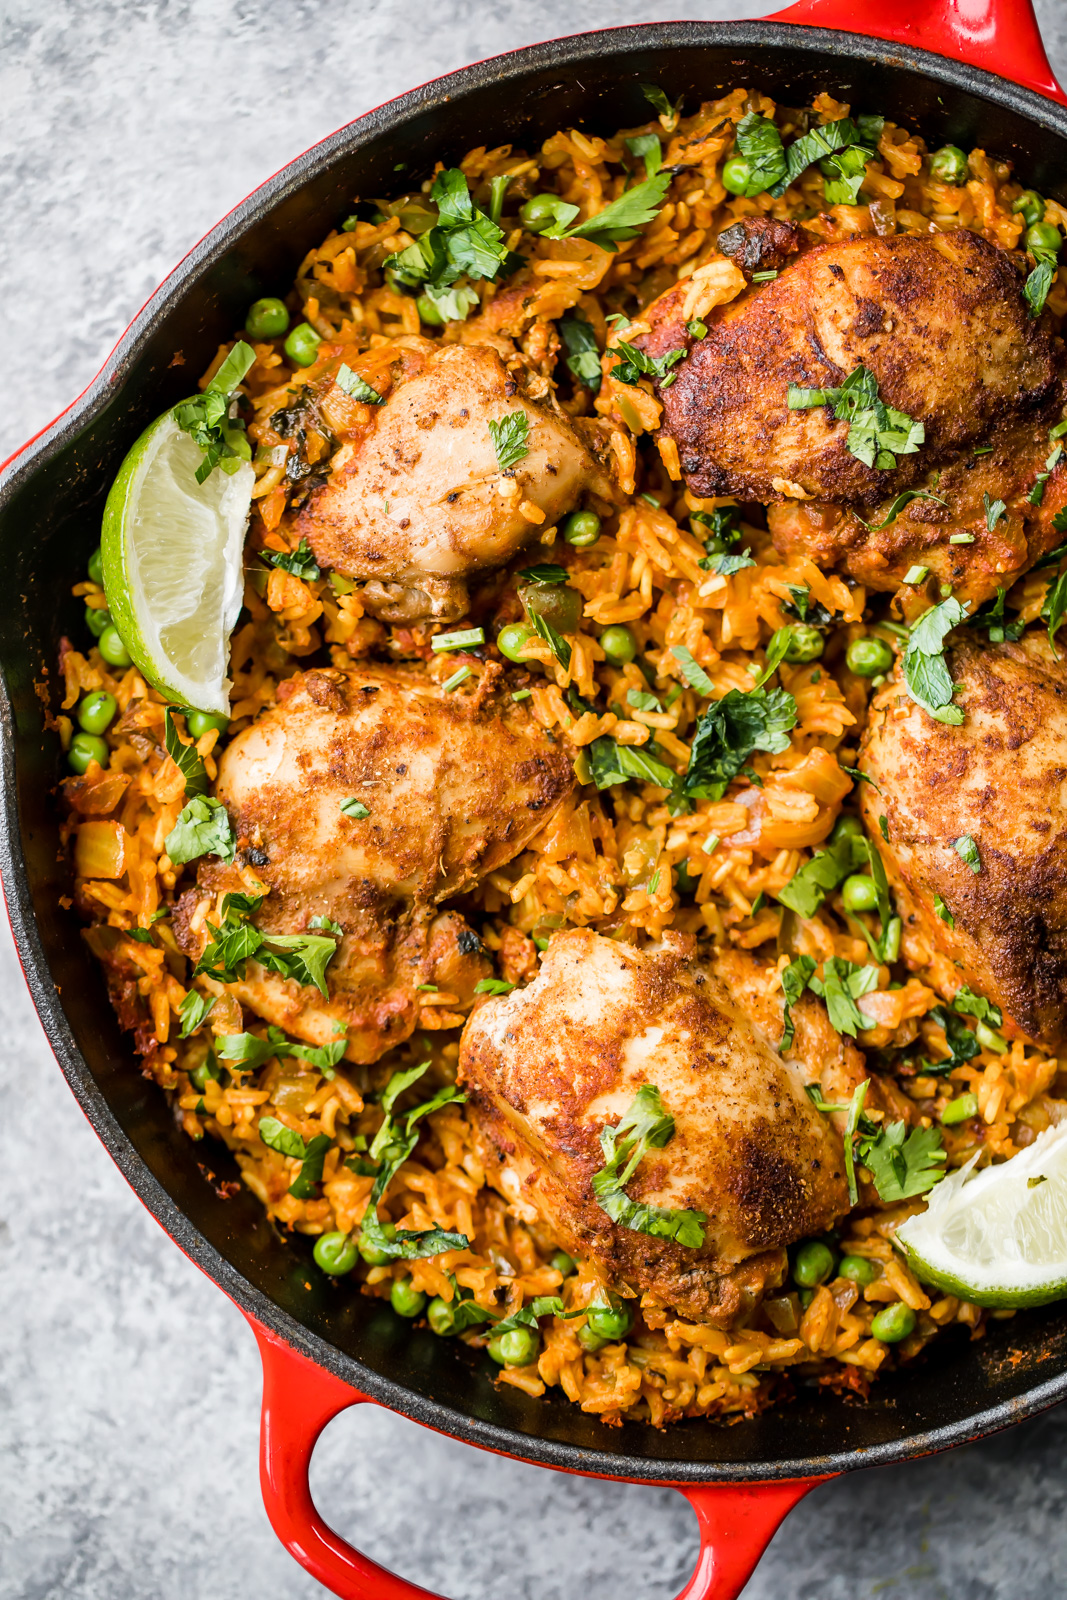 Cool Mom Eats weekly meal plan: Mama's Puerto Rican Chicken and Rice (Arroz con Pollo) at Ambitious Kitchen